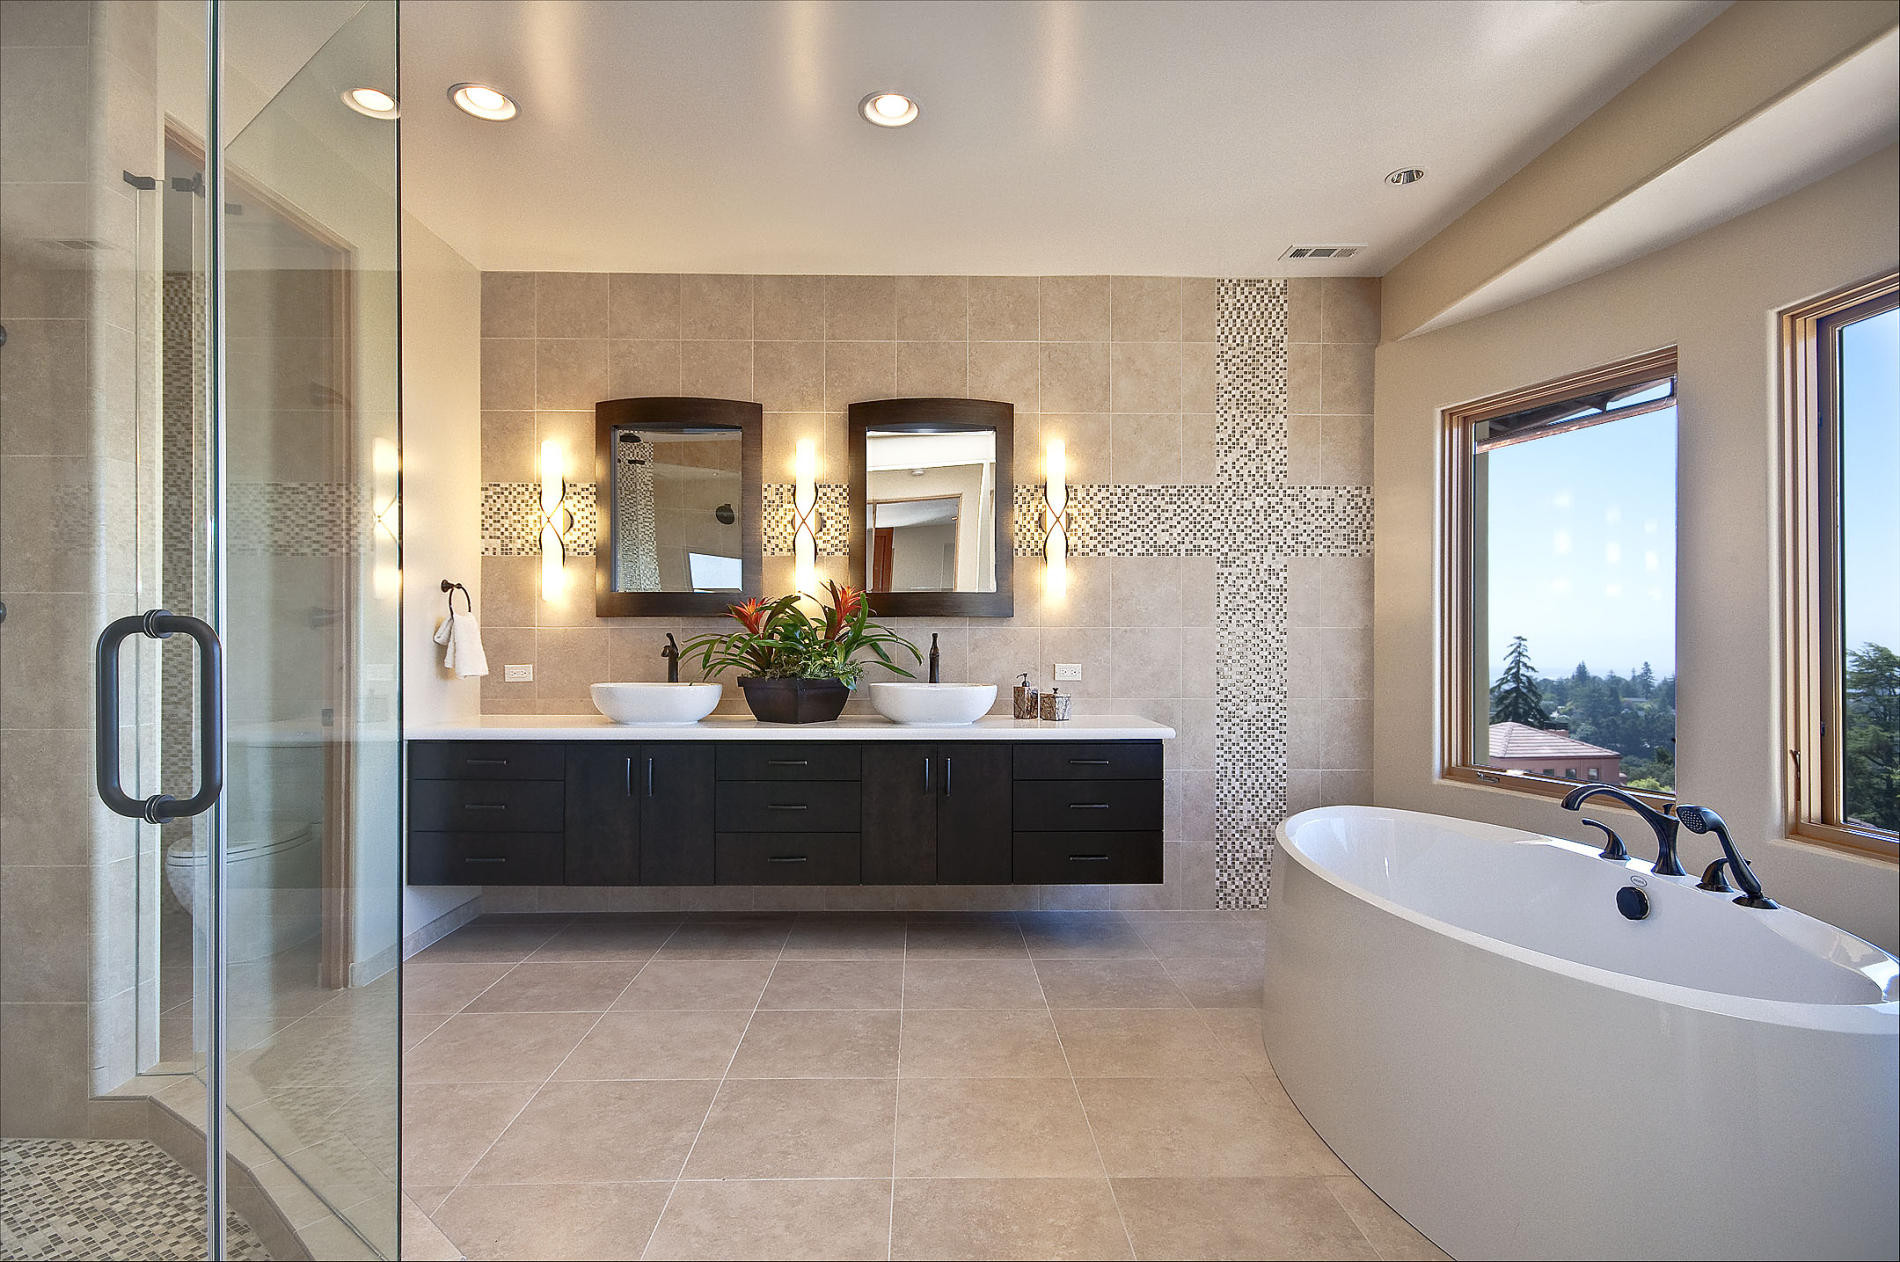 Master Bathroom Plans
 Why You Should Planning Master Bathroom Layouts MidCityEast